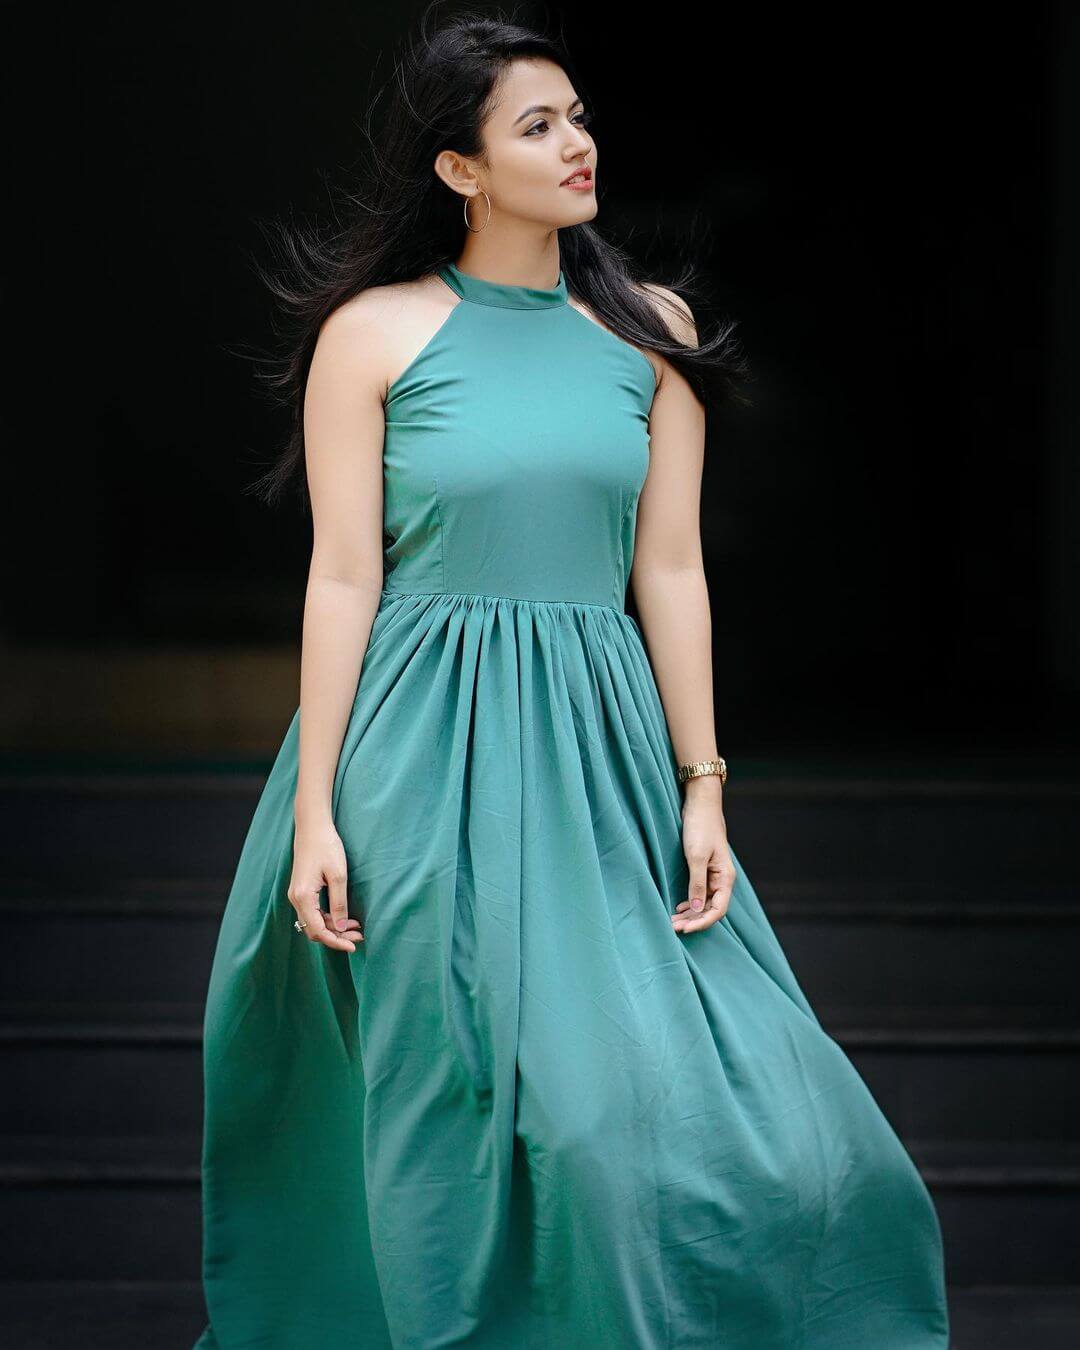 Aparna Das Look Fabulous In a Green Halter Neck Solid Maxi Dress With Hoops Earrings - Festive Outfits & Looks